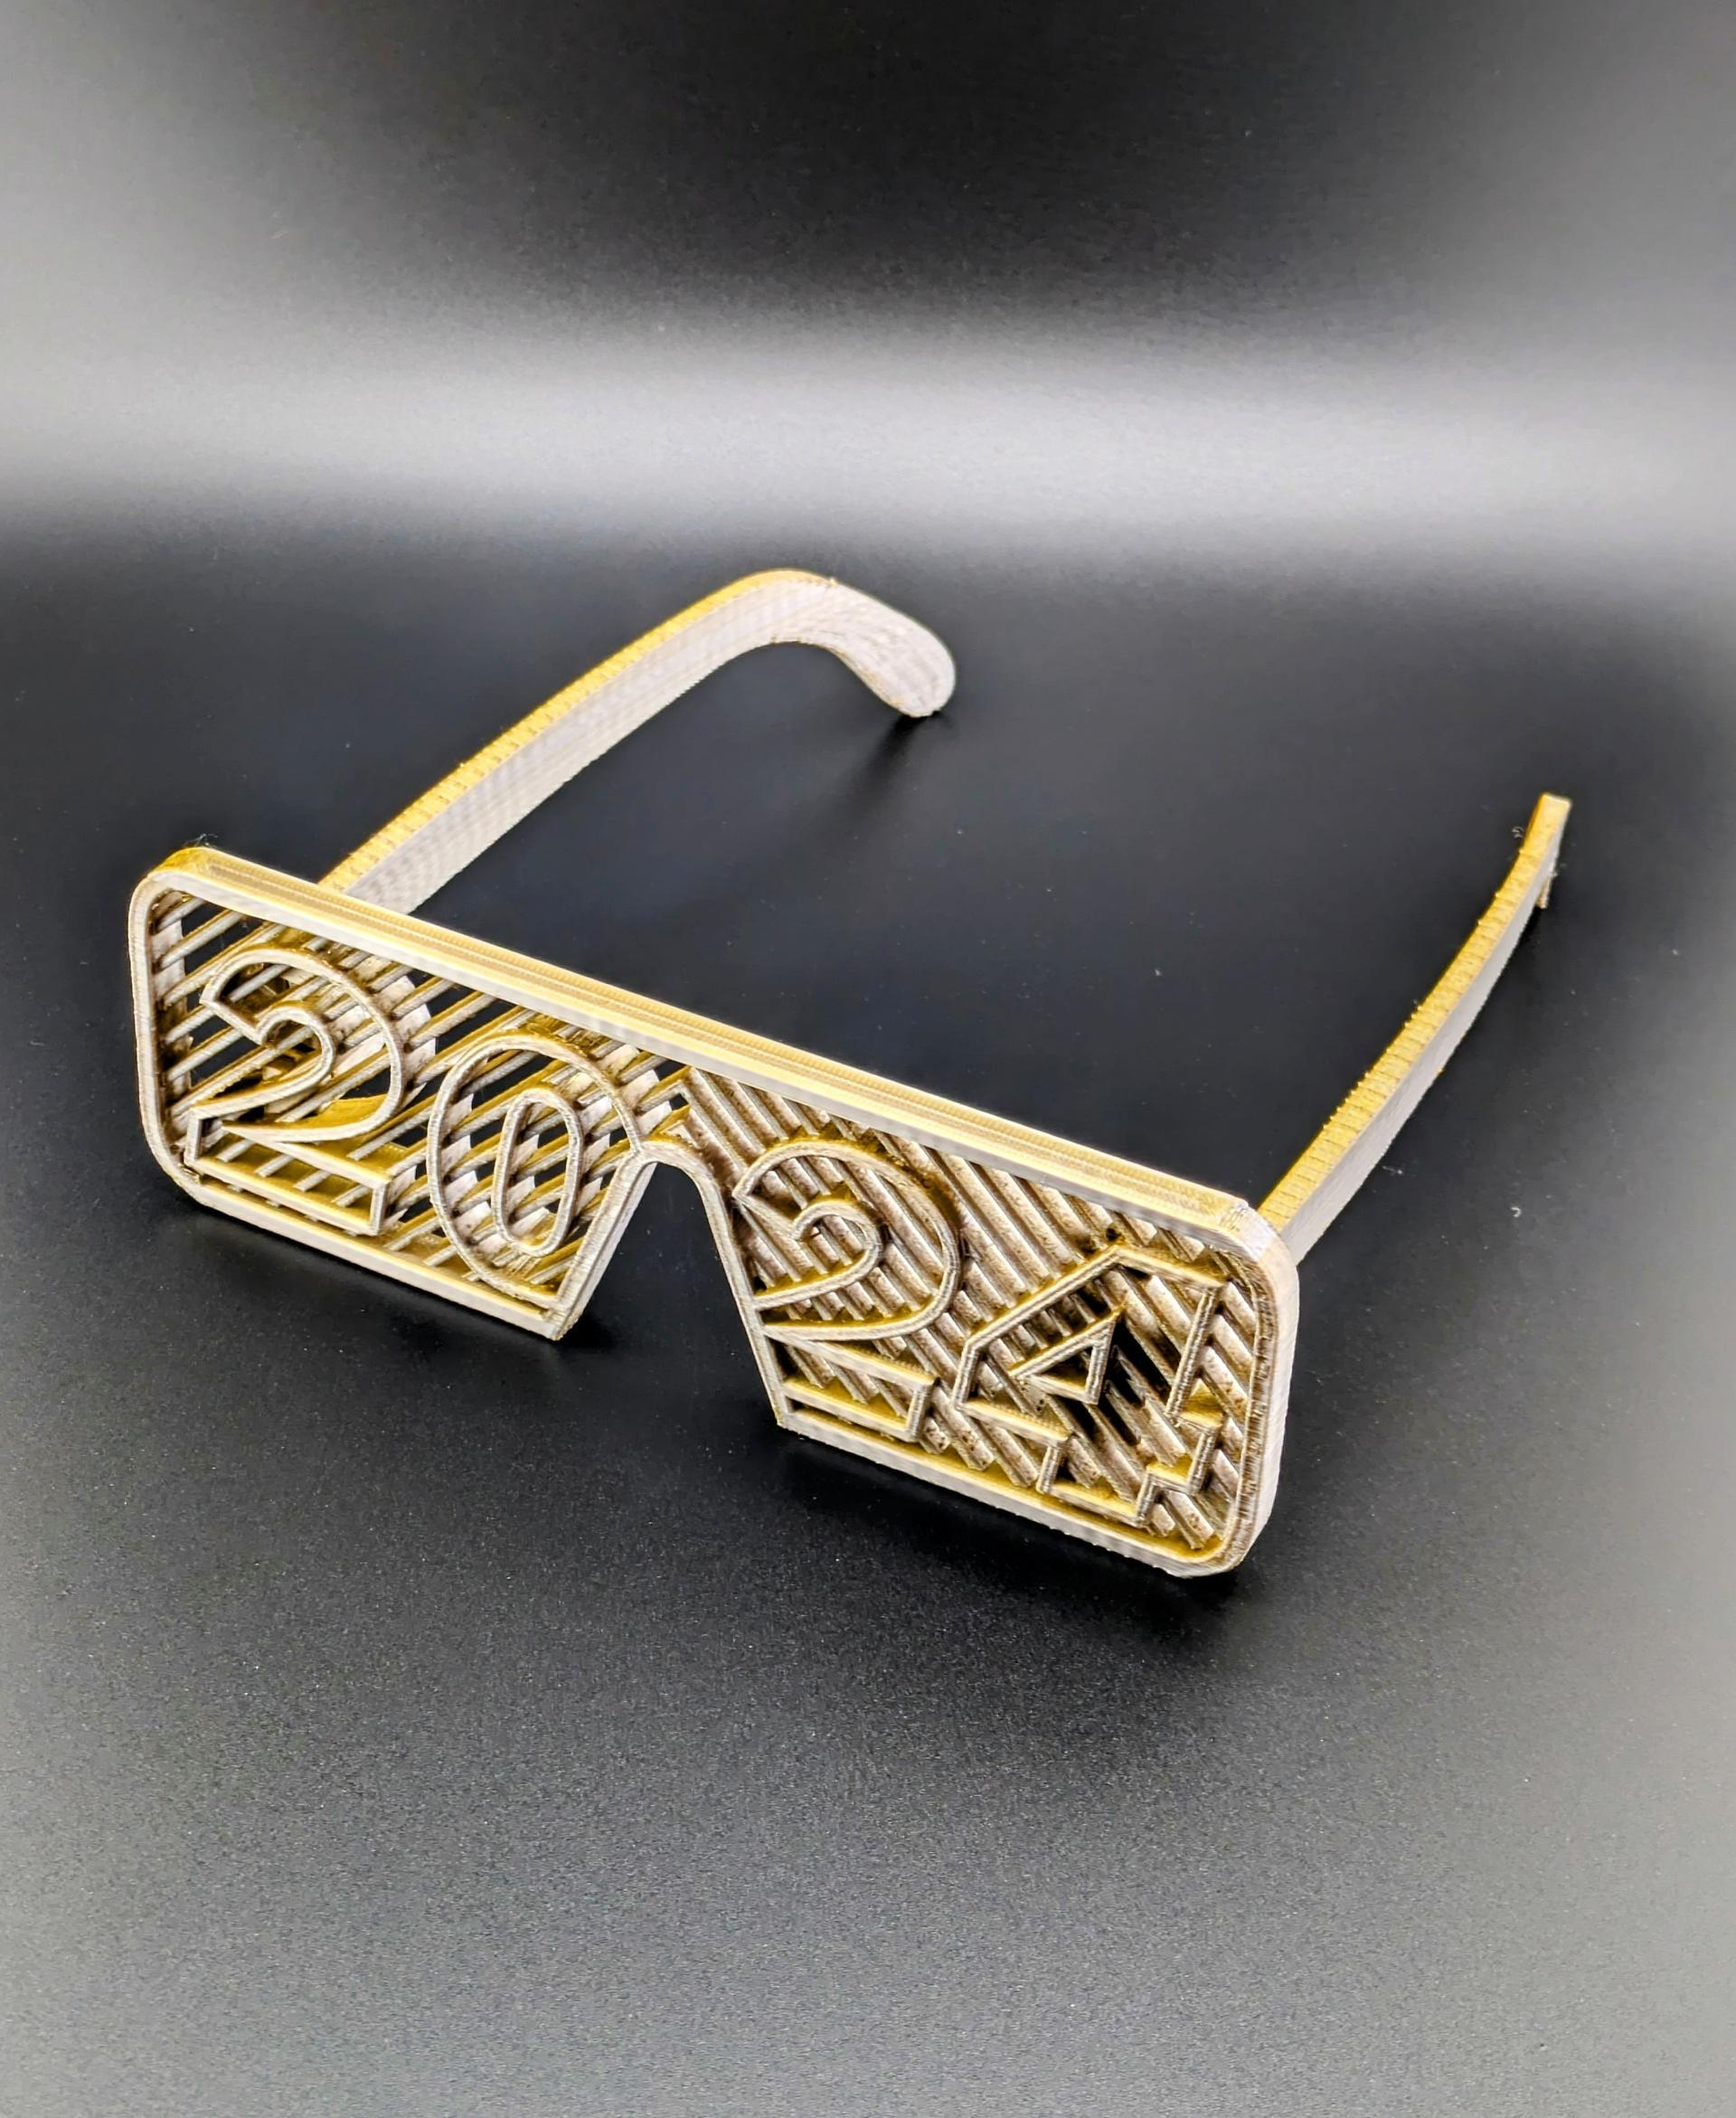 2024 Glasses - 2024 Glasses printed in Silver Gold MatterHackers Quantum PLA 

(Printed On Ankermake M5C at .16mm layerheight) - 3d model